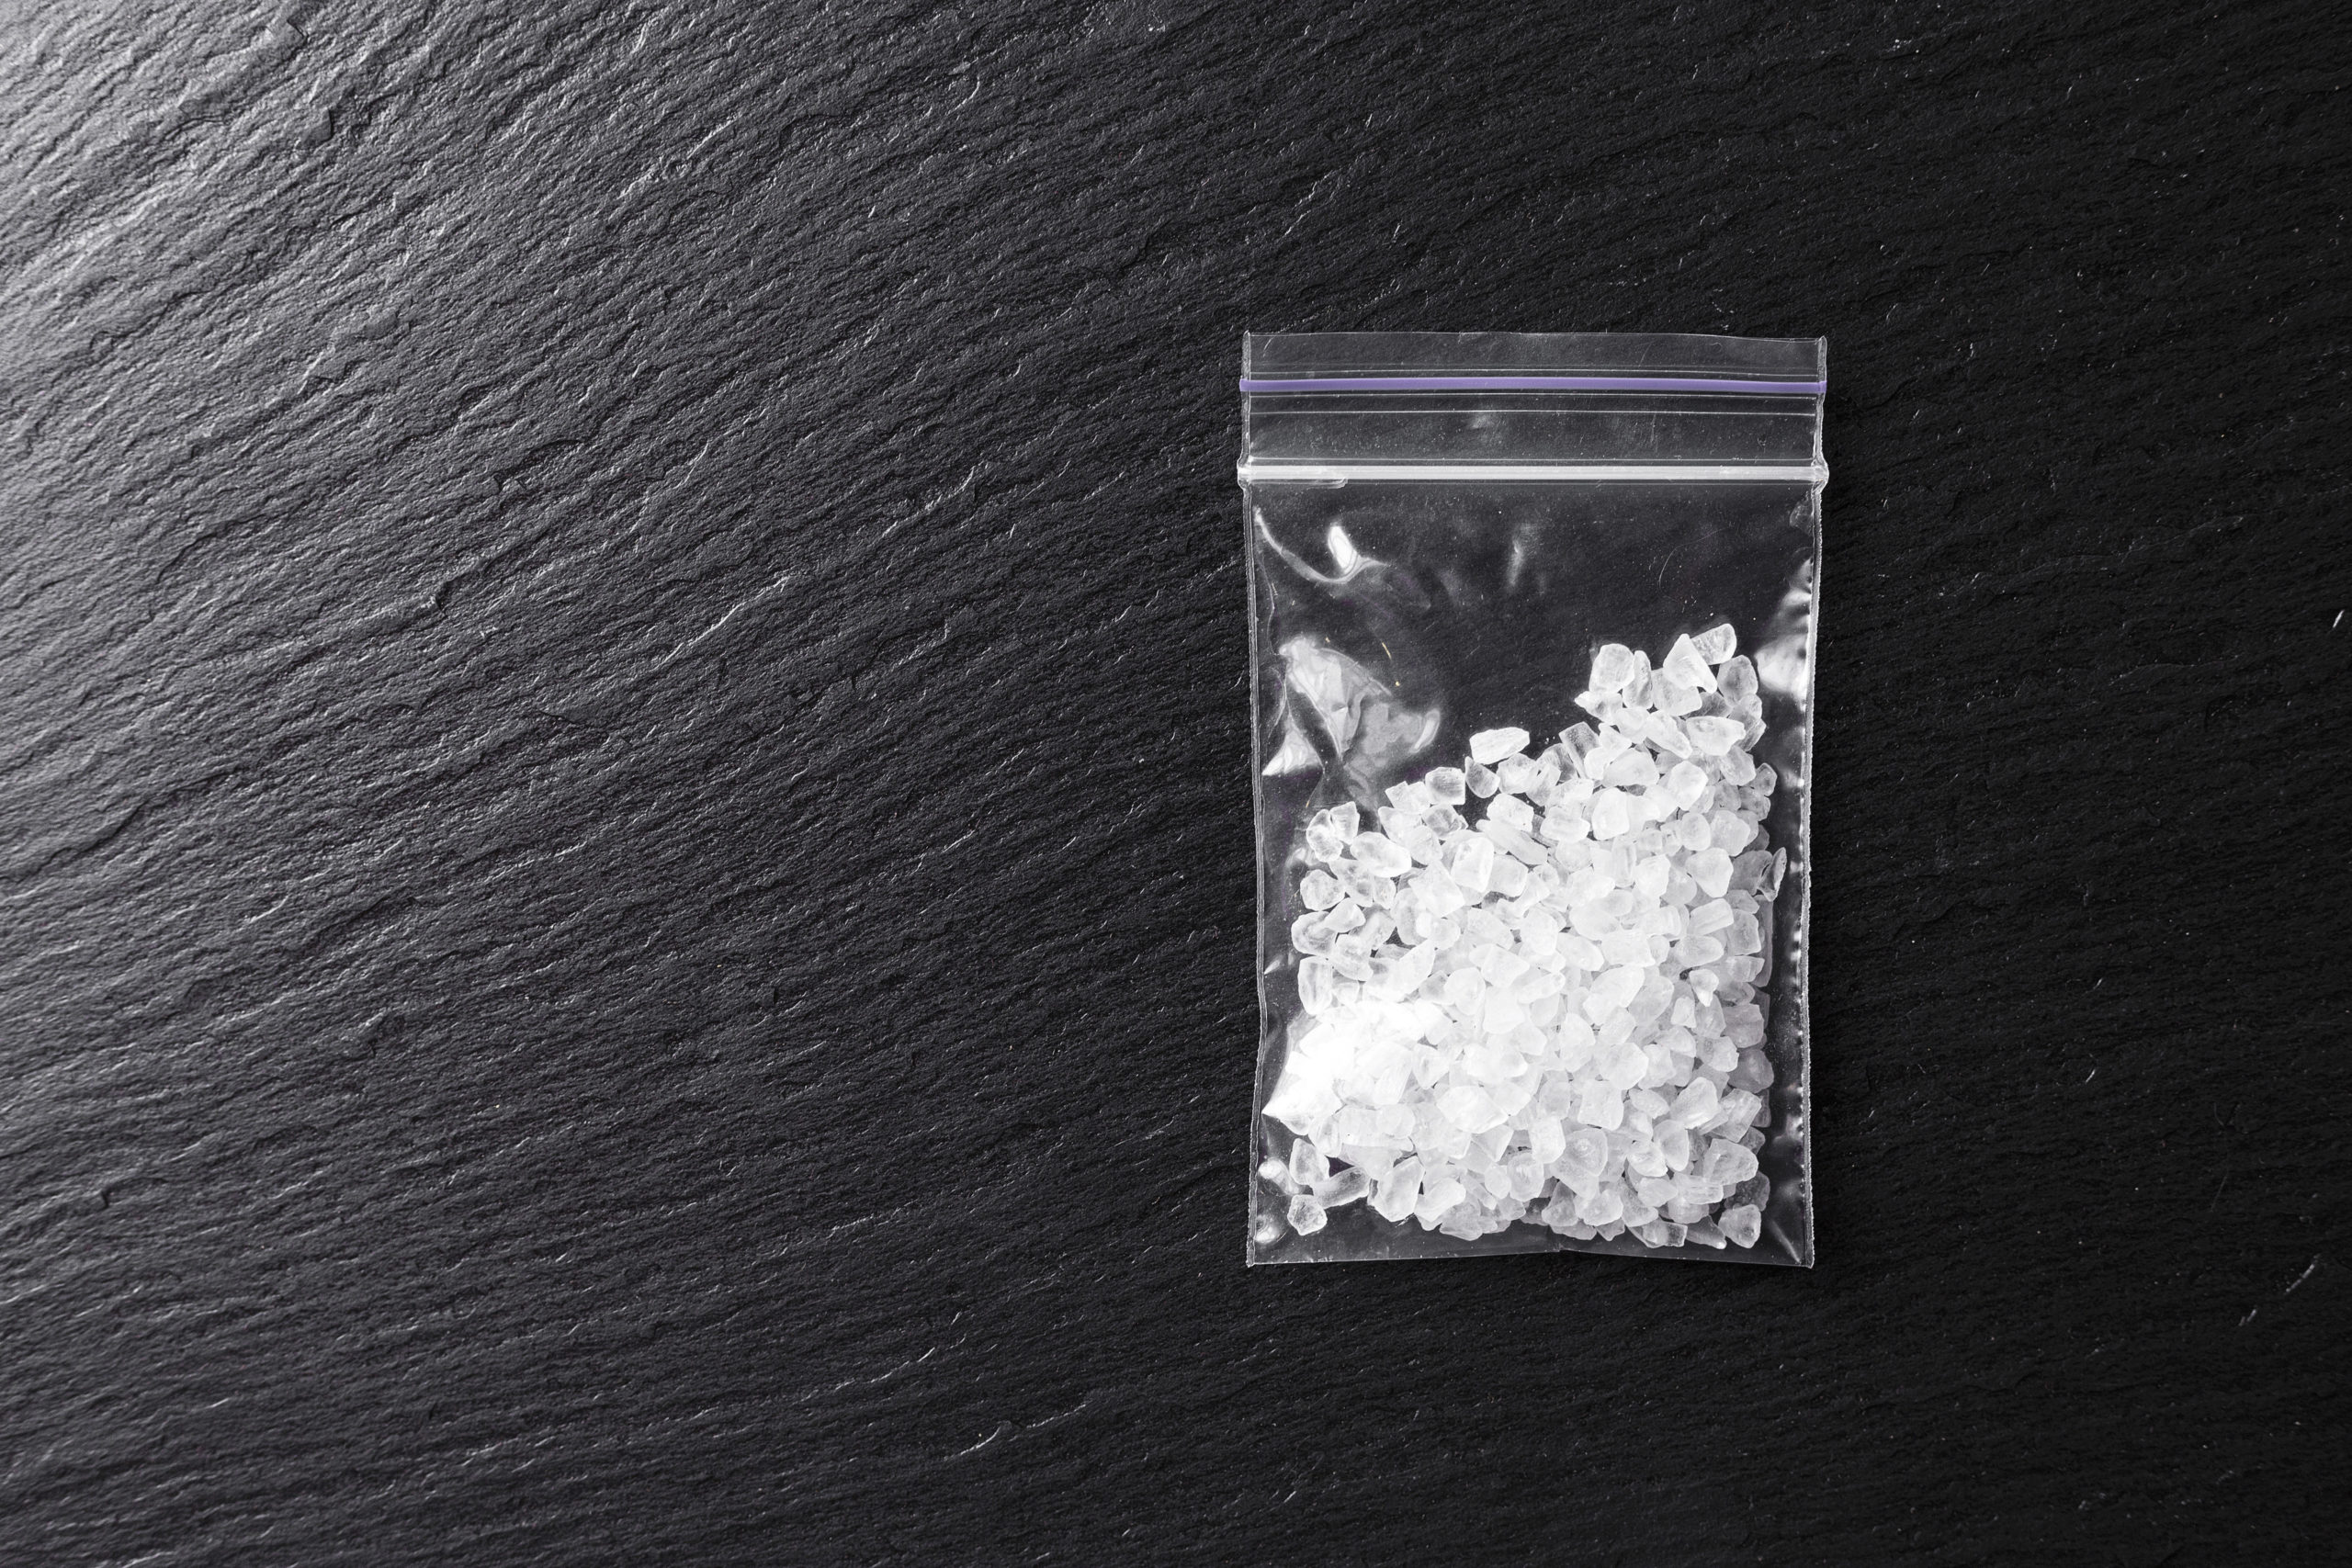 Methamphetamine is a highly addictive stimulant that can be snorted, smoked, injected or taken orally. 